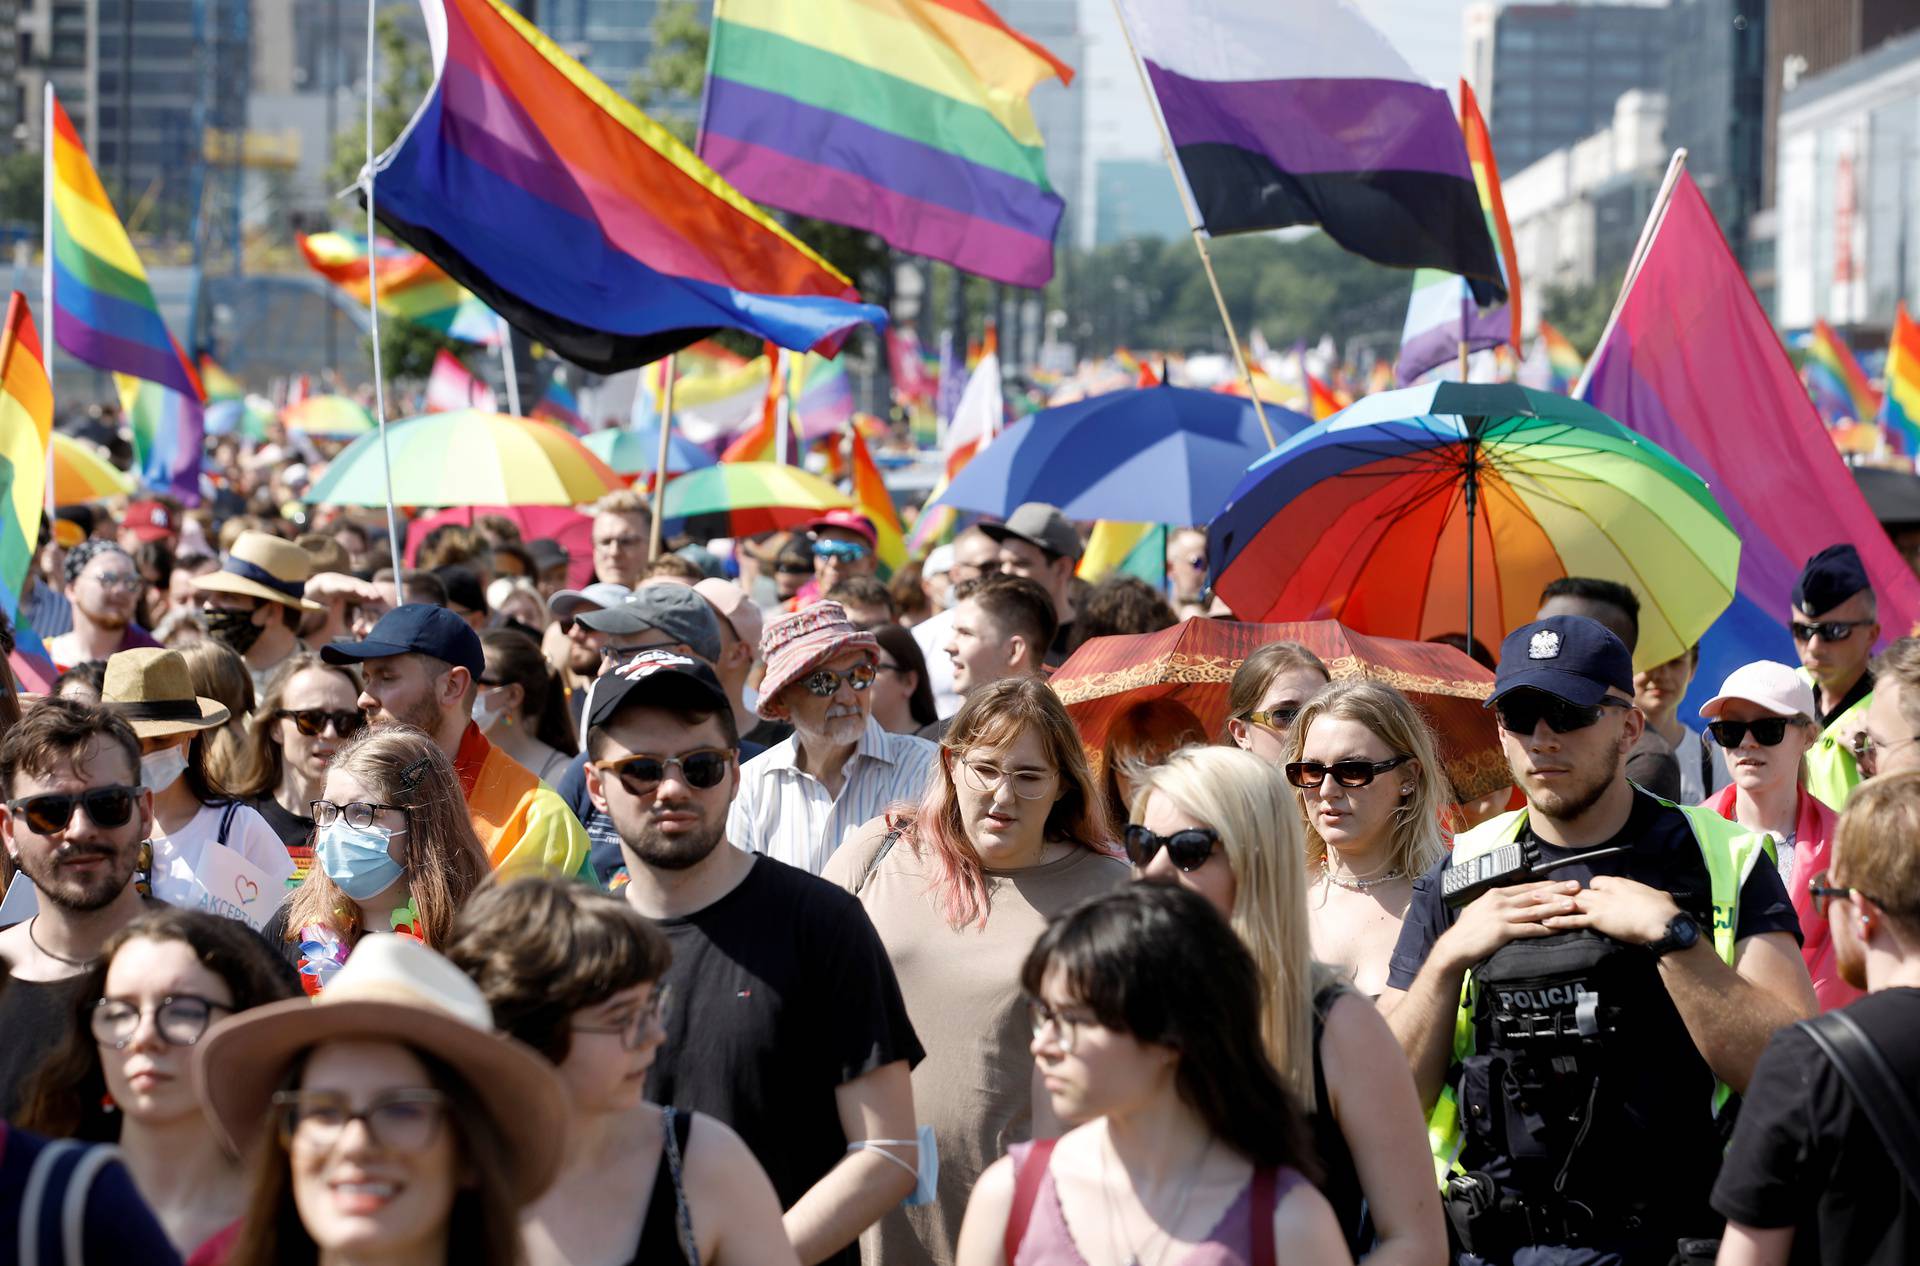 "Equality Parade" rally in support of the LGBT community, in Warsaw